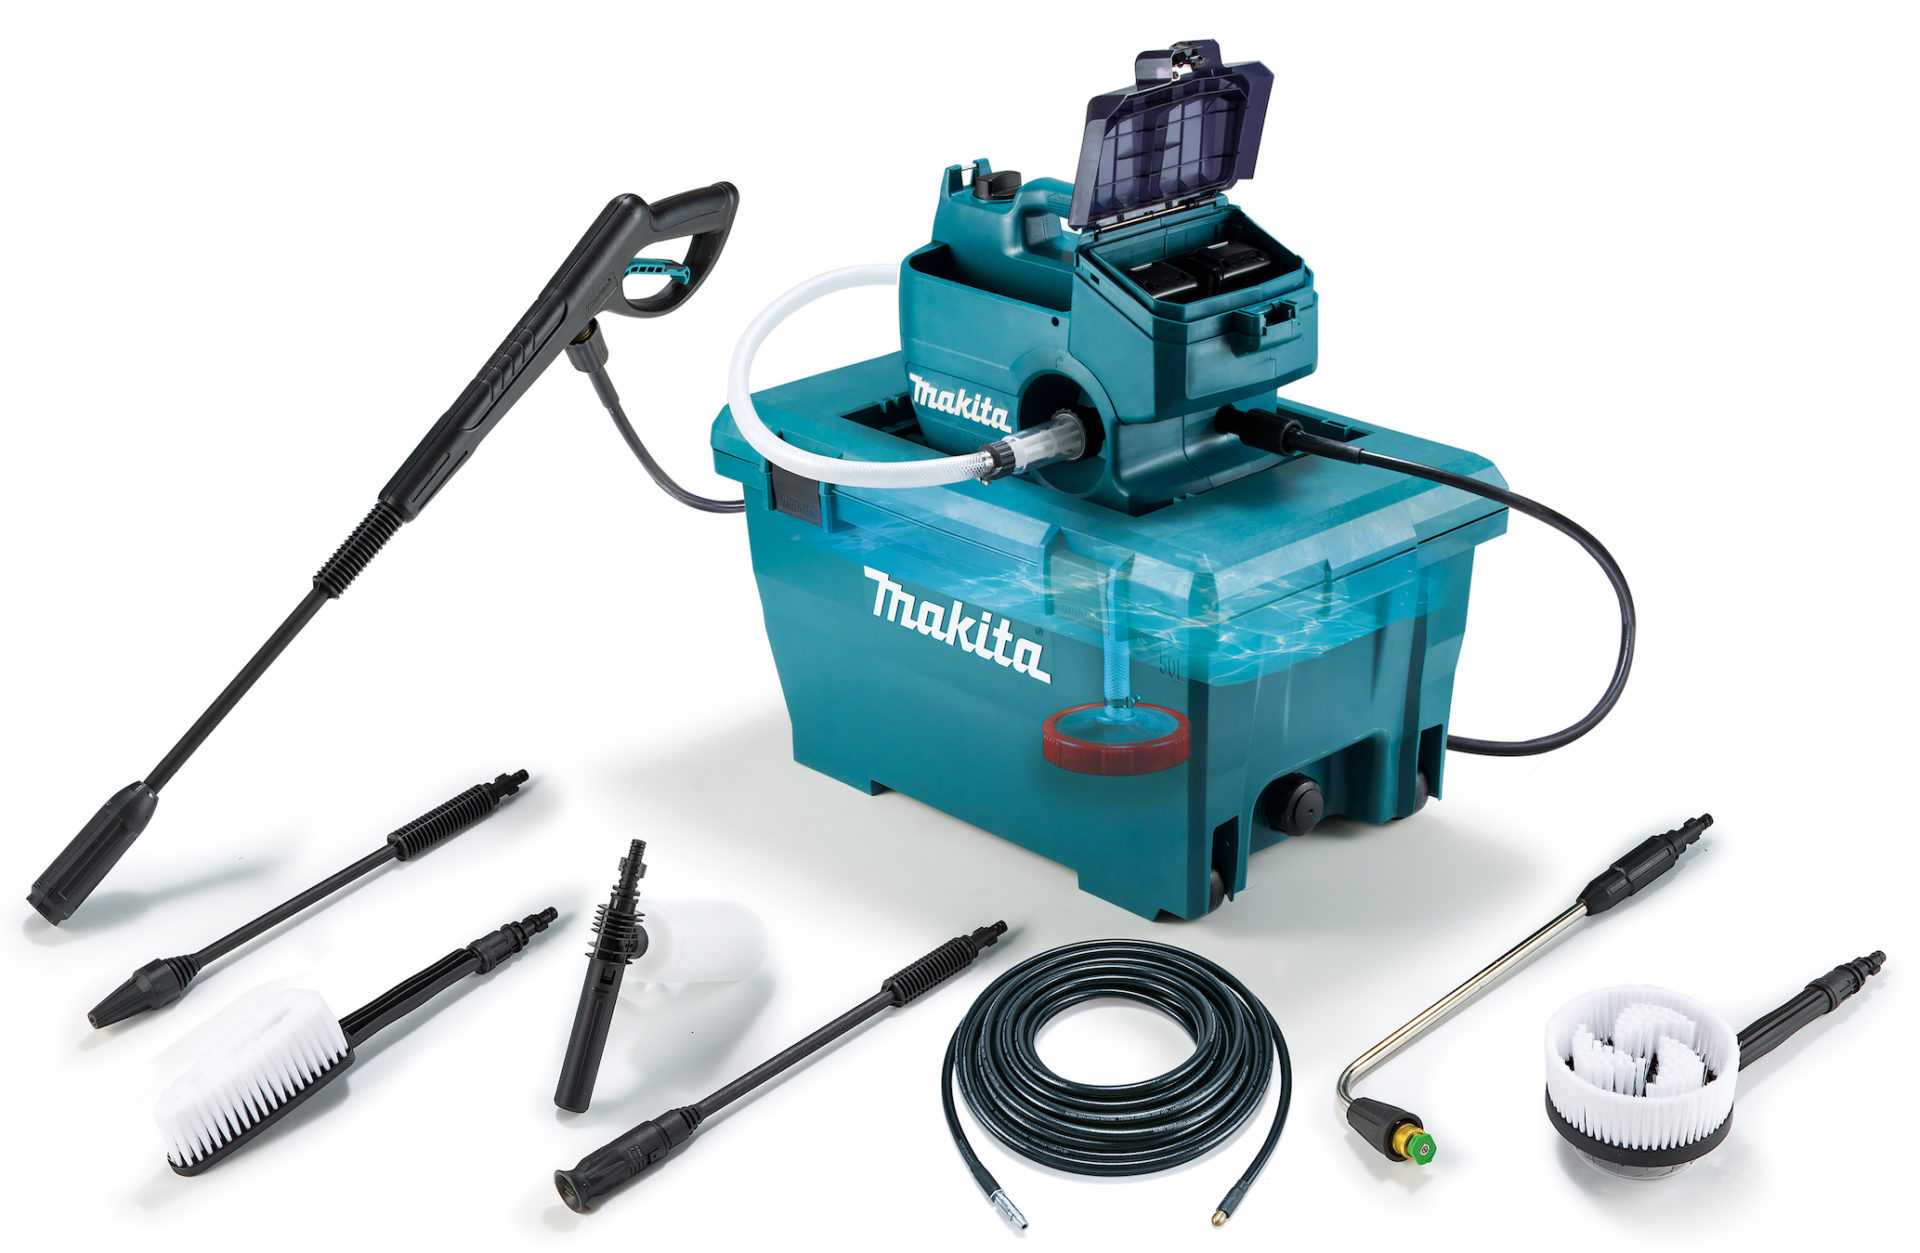 Makita launches new cordless LXT pressure washer